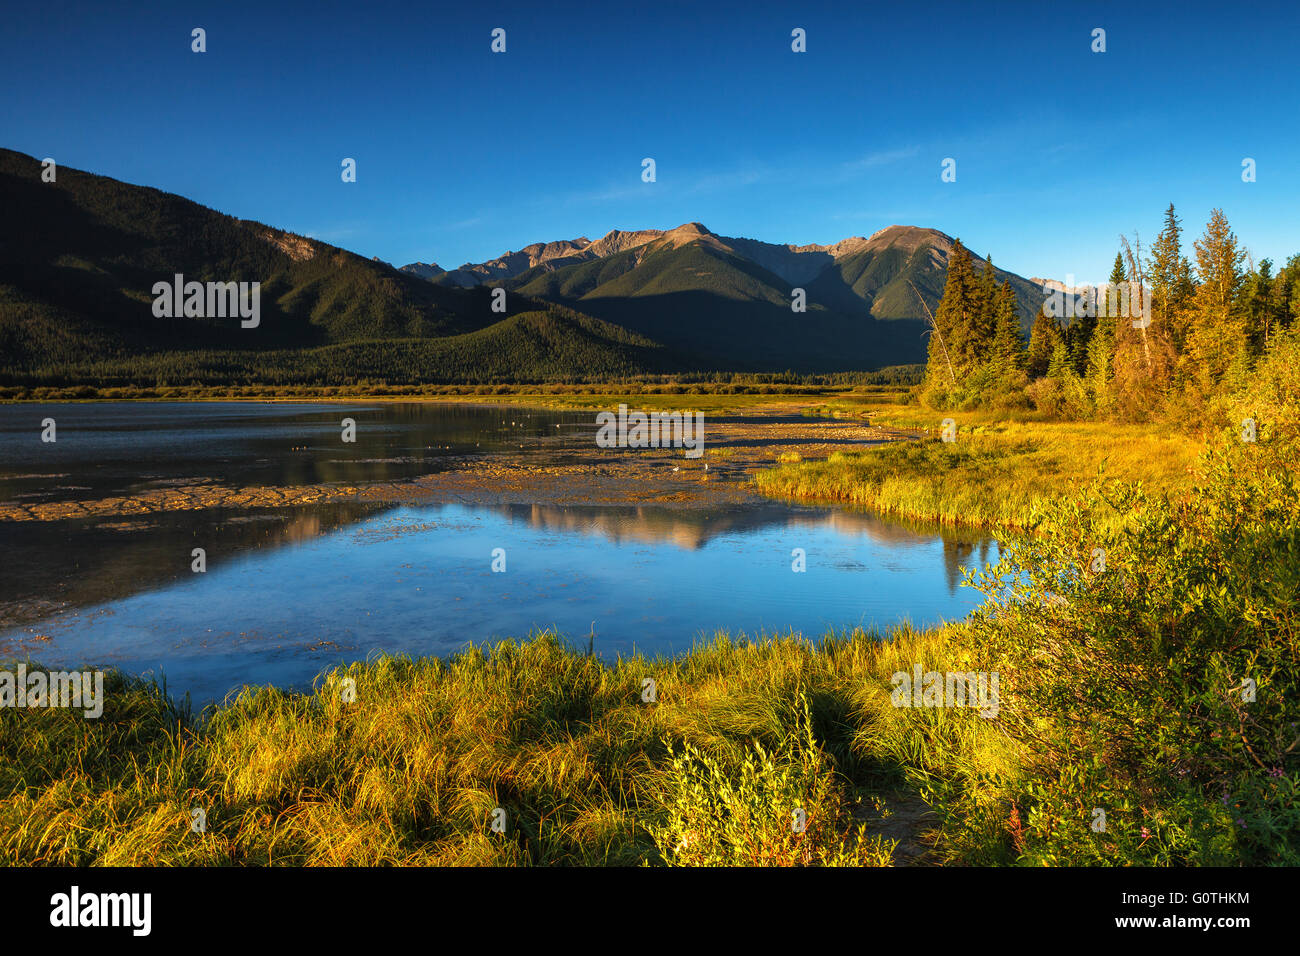 Vermilion Lakes by sunrise. Banff National Park (Canadian Rocky Mountains), Alberta, Canada. Stock Photo